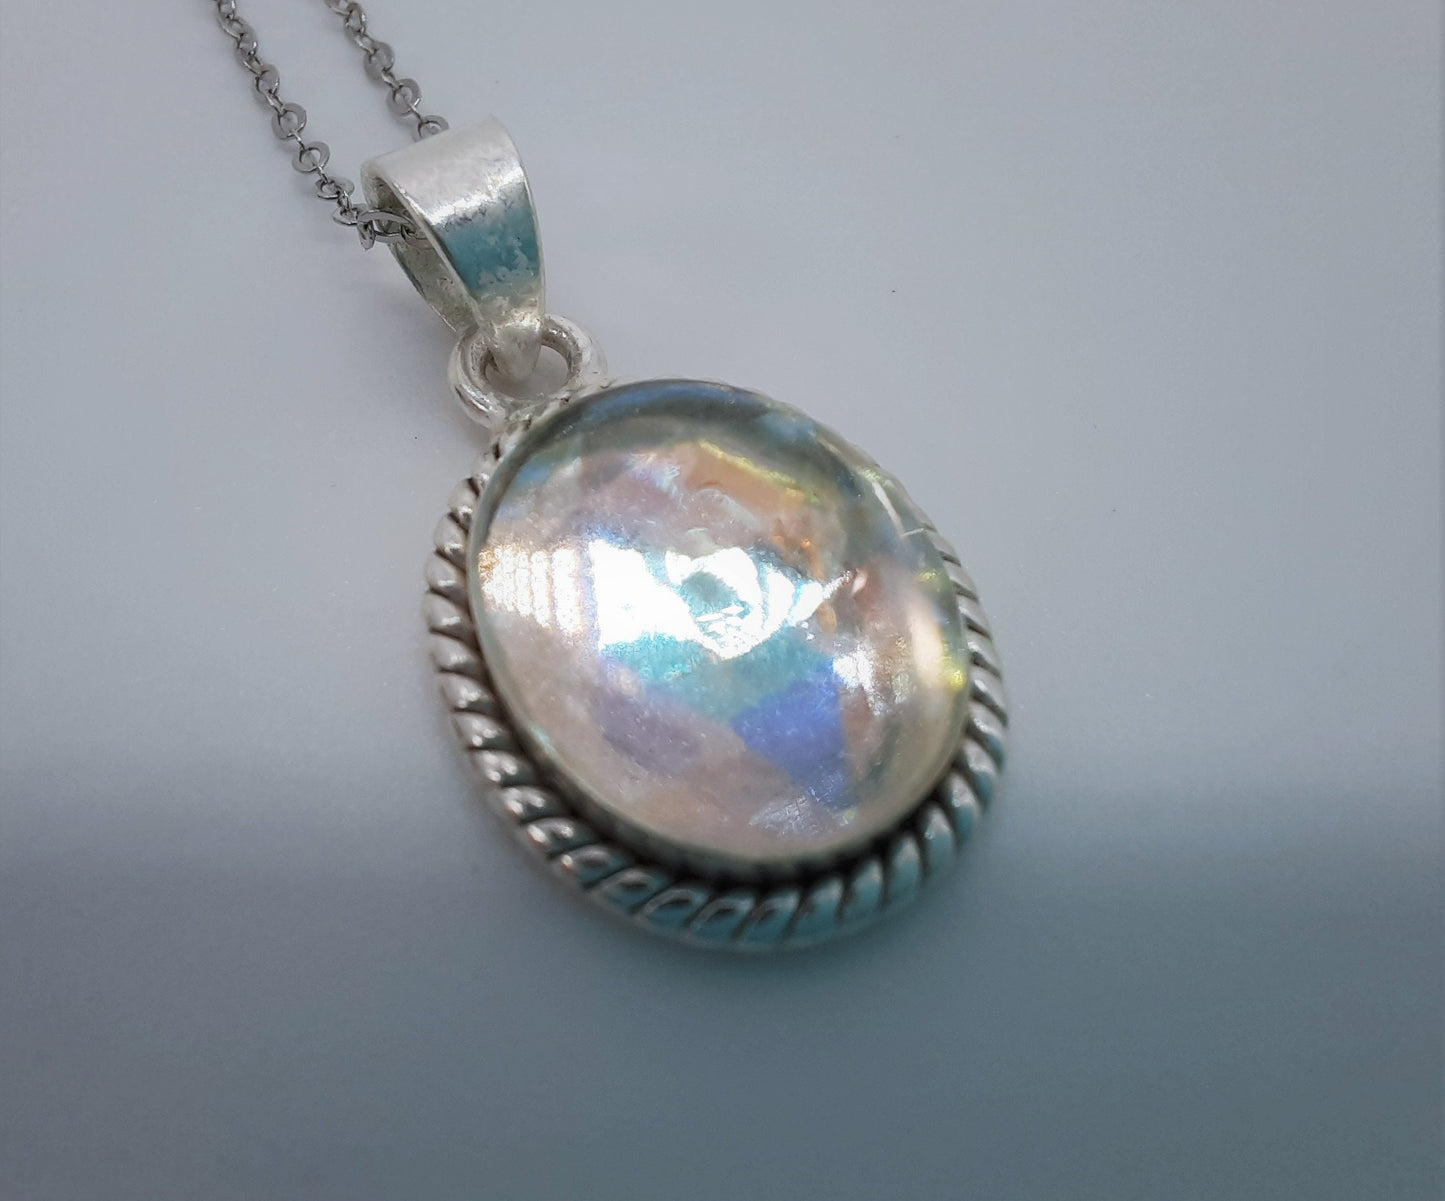 Handcrafted Multifaceted Vintage Aurora Borealis Glass Cabochon Pendant Necklace, Domed with Mica Infused Resin, 925 Sterling Silver